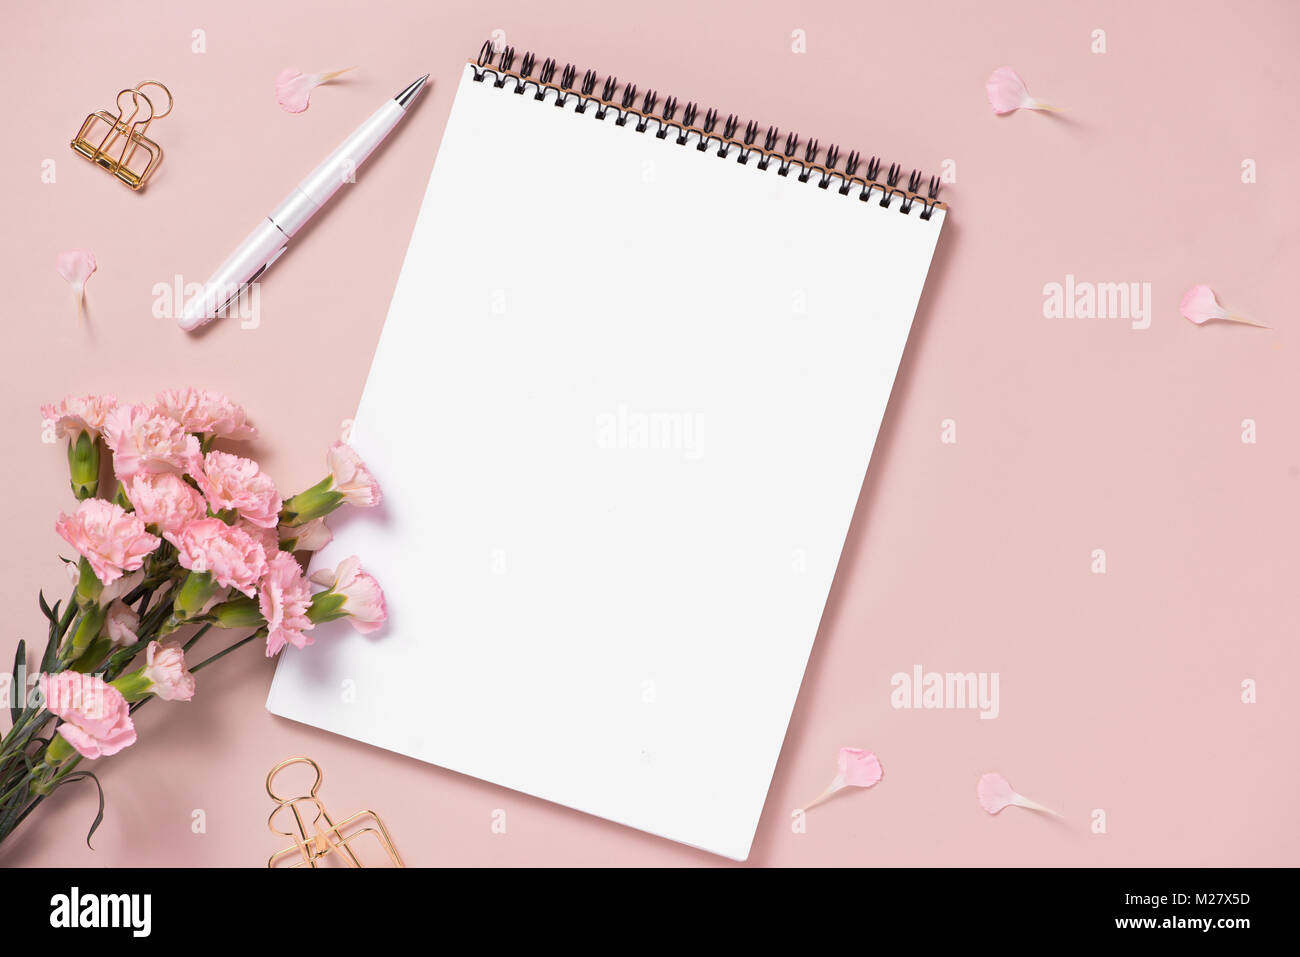 Mockup planner flat lay. Accessory on the table. View top. Events and party desktop. Stock Photo